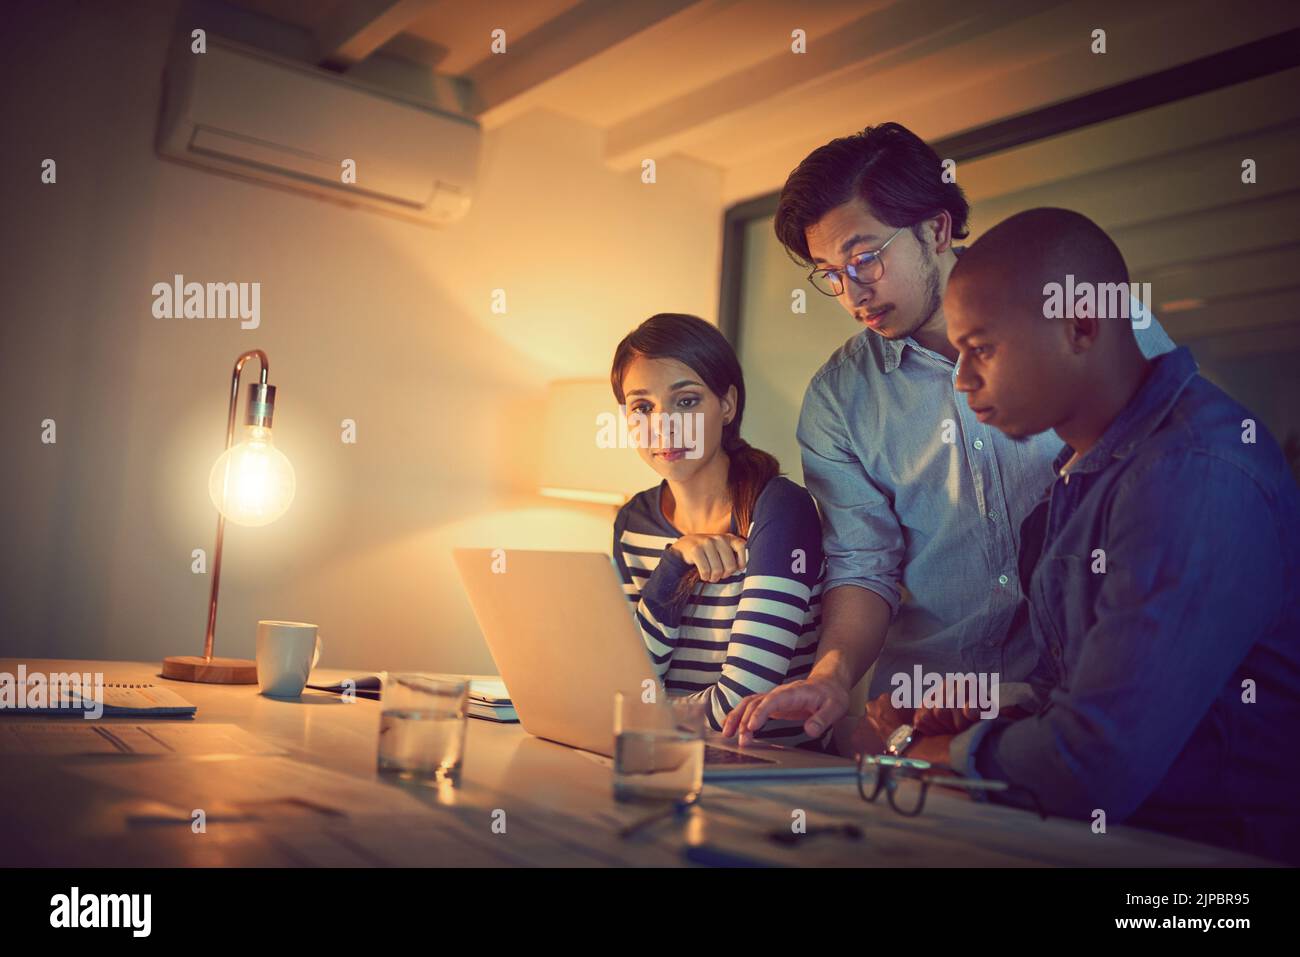 They have deadlines to meet. a group of designers working late in an office. Stock Photo